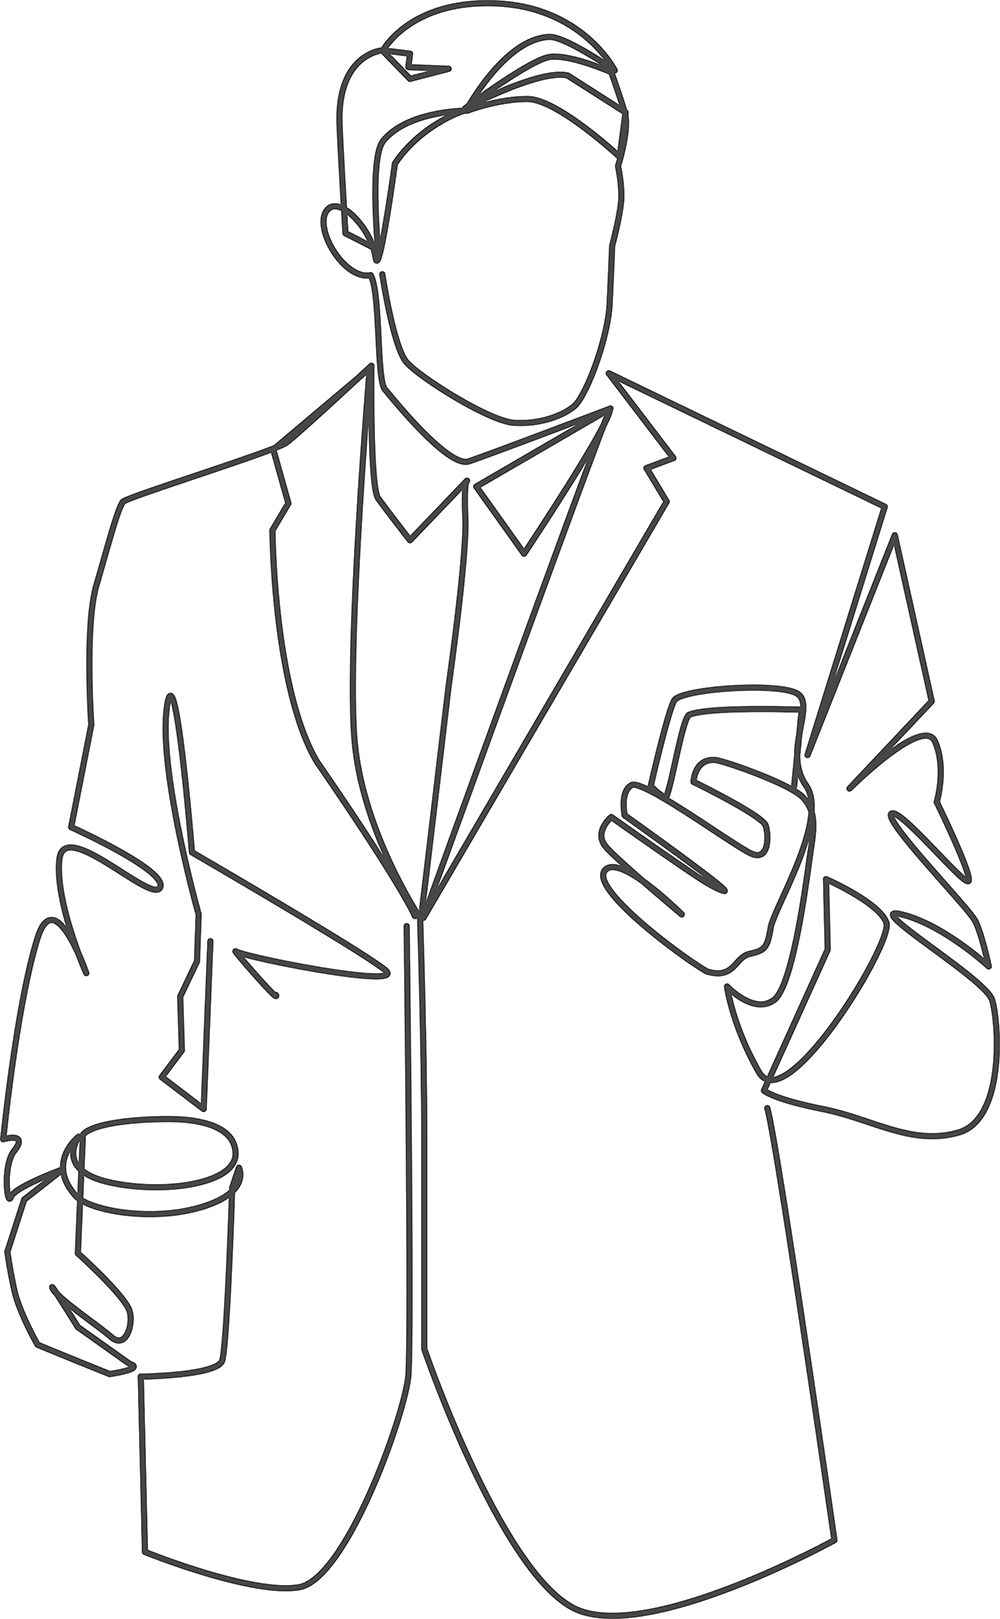 Illustration of a man checking his phone